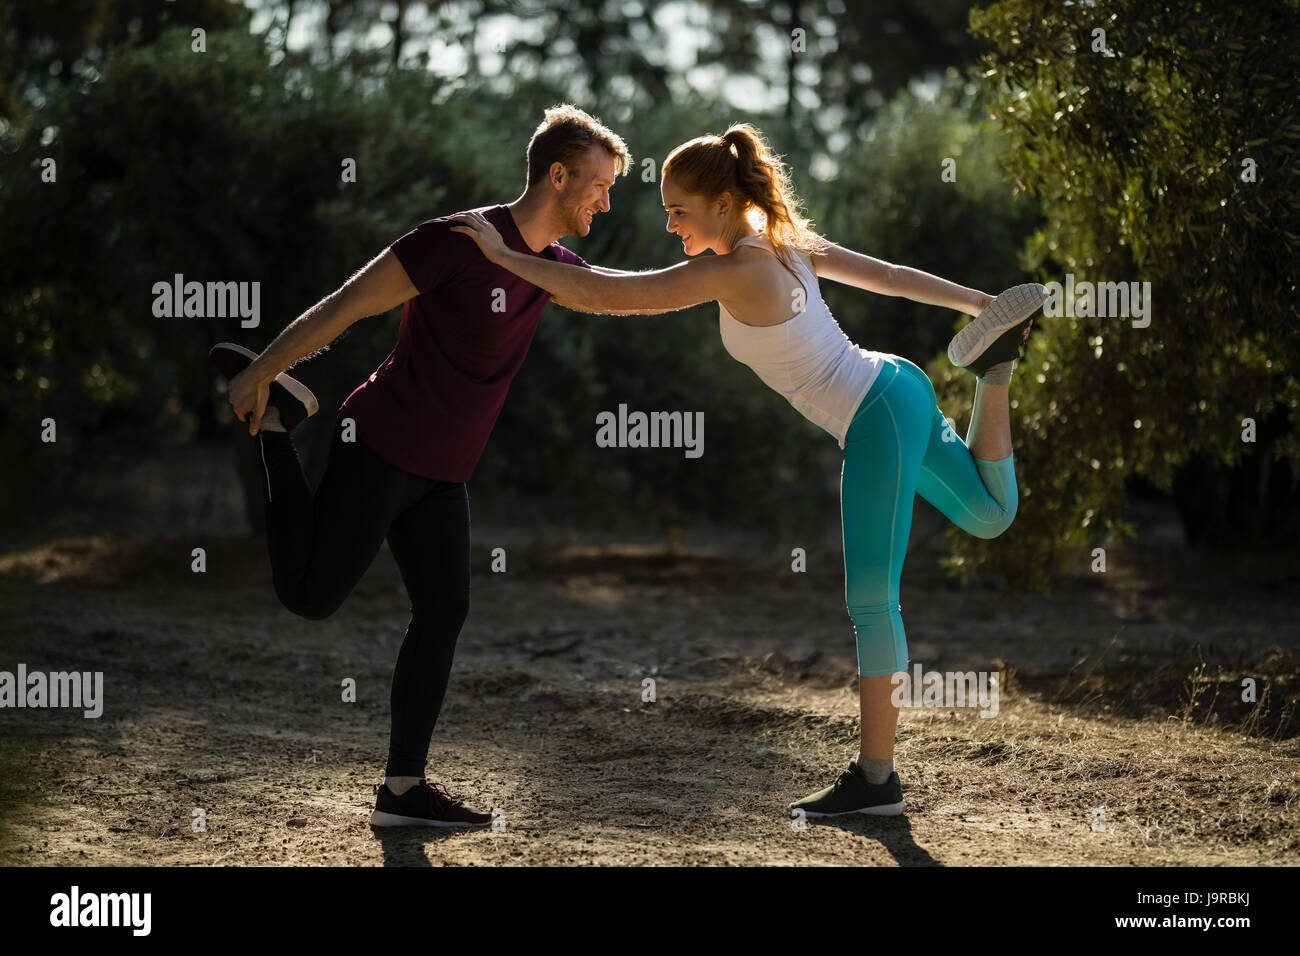 Full length of young man and woman exercising on field at farm during sunny day Stock Photo